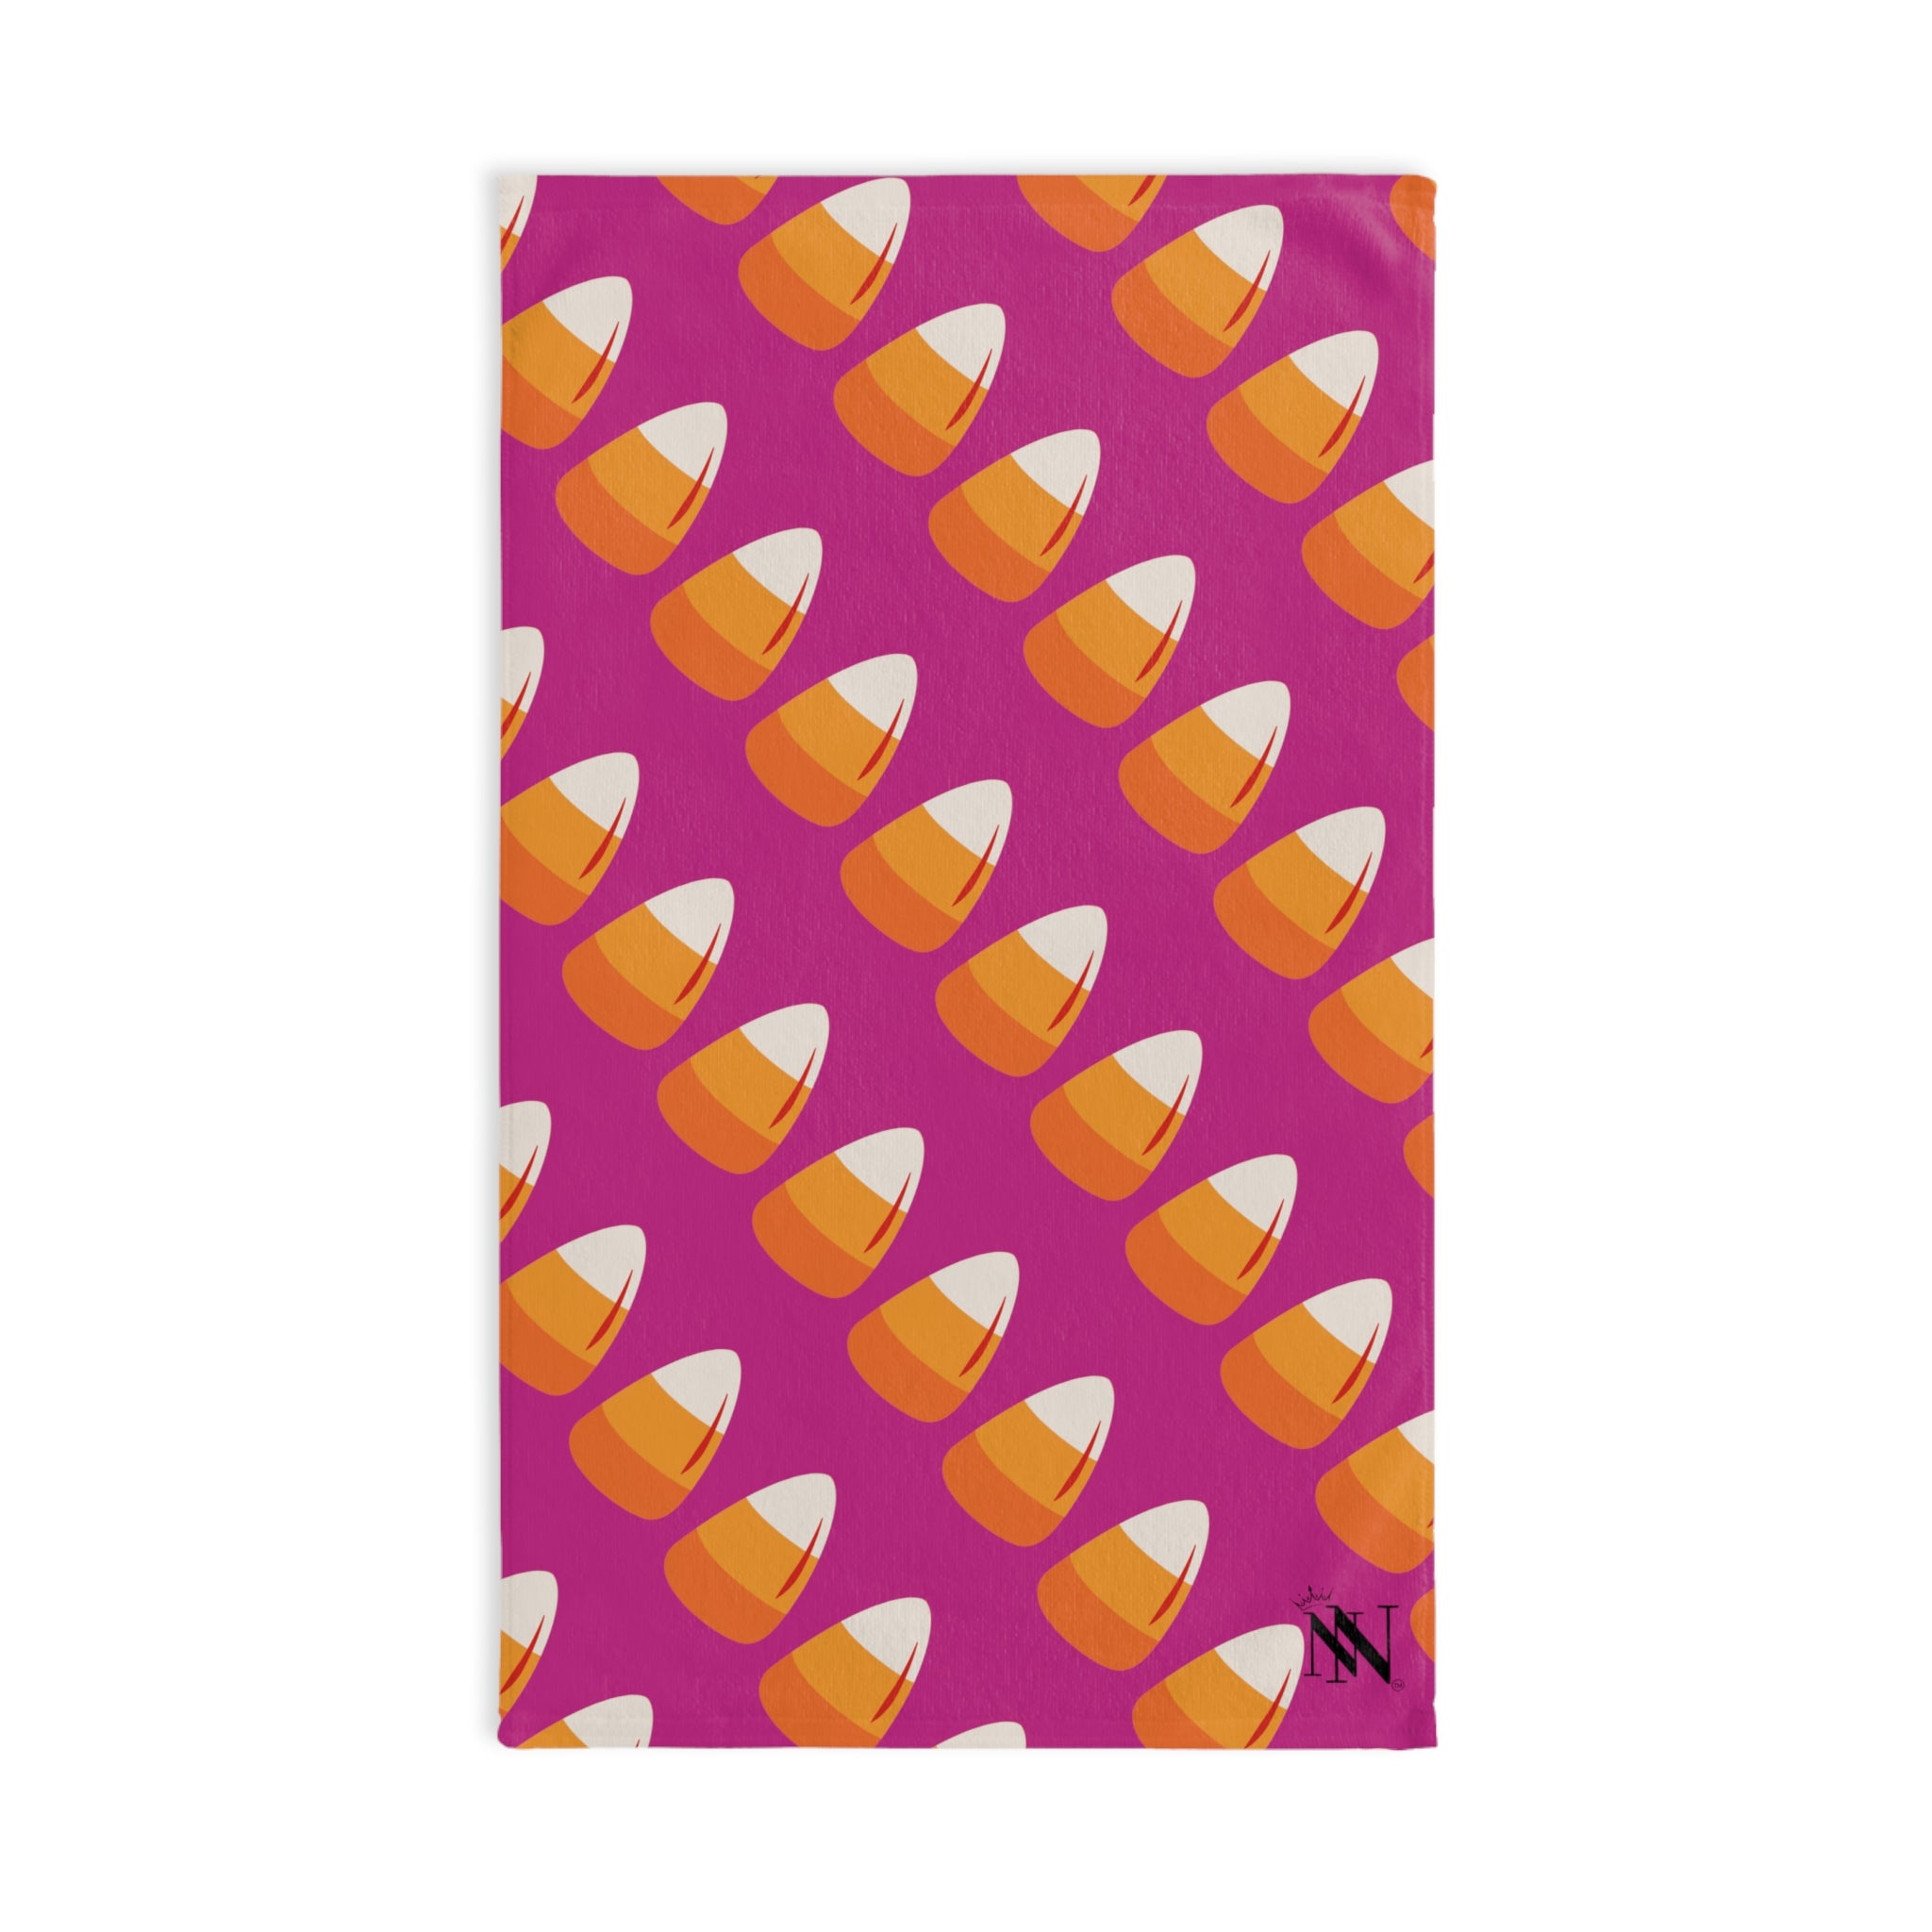 Candy Corn Fuscia | Funny Gifts for Men - Gifts for Him - Birthday Gifts for Men, Him, Husband, Boyfriend, New Couple Gifts, Fathers & Valentines Day Gifts, Hand Towels NECTAR NAPKINS